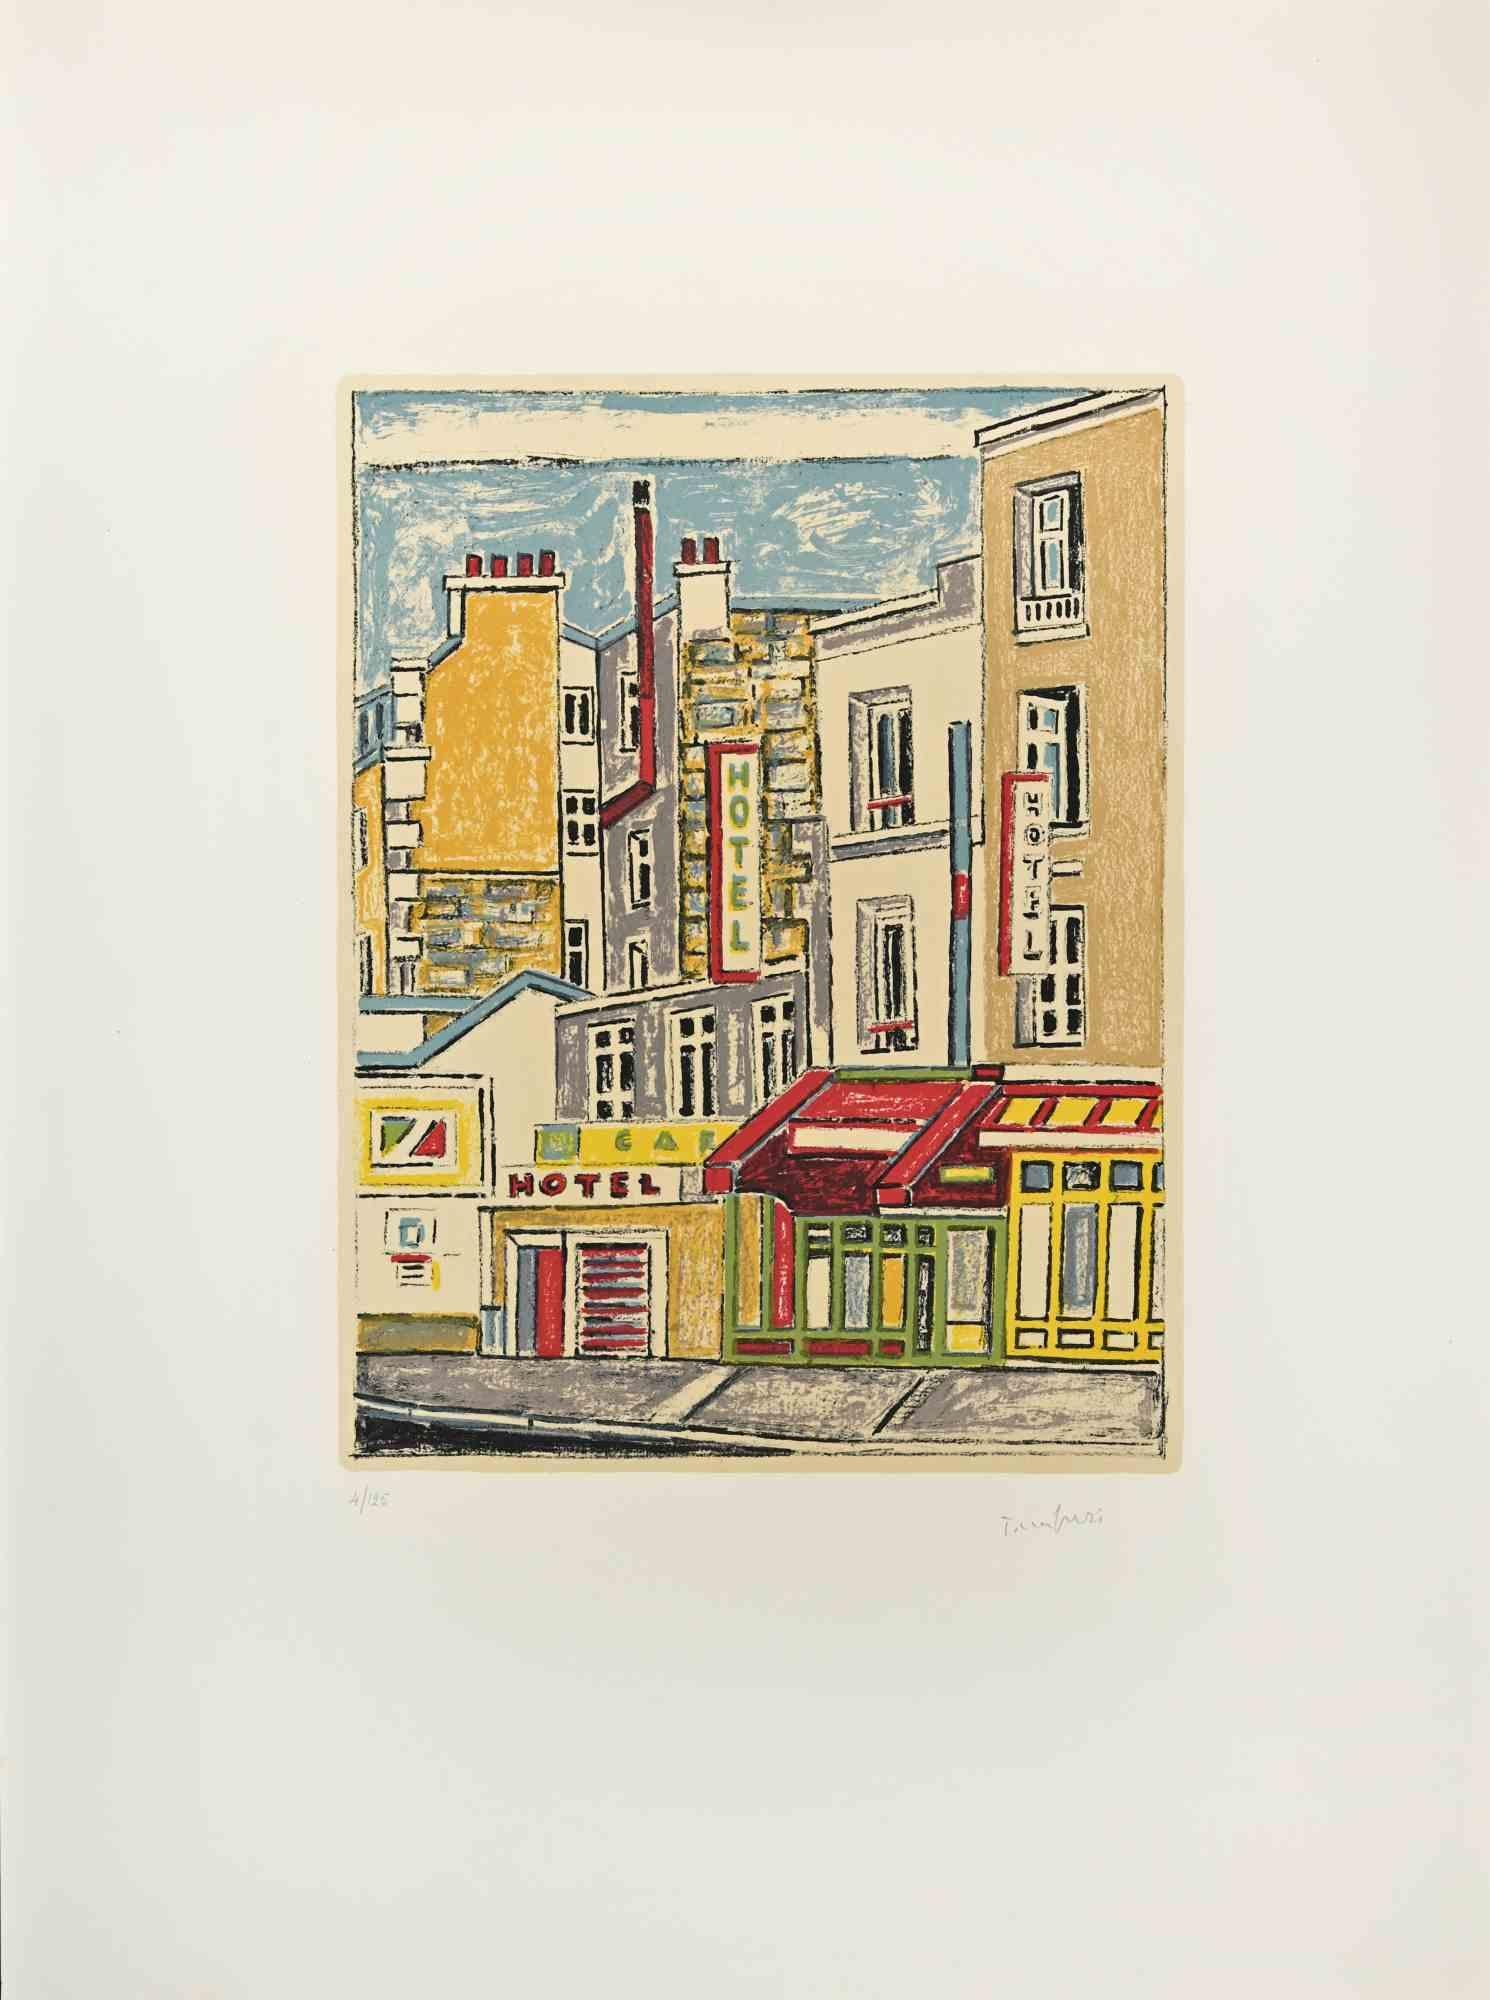  Paris, Houses and Walls is a Modern artwork realized by Orfeo Tamburi  (Jesi, 1910 – Paris,1994) in the 1970s. 

Colored Lithograph. 

Hand-signed.

Numbered on the lower, Edition, 125 prints.

Good conditions. 

Orfeo Tamburi (Jesi,